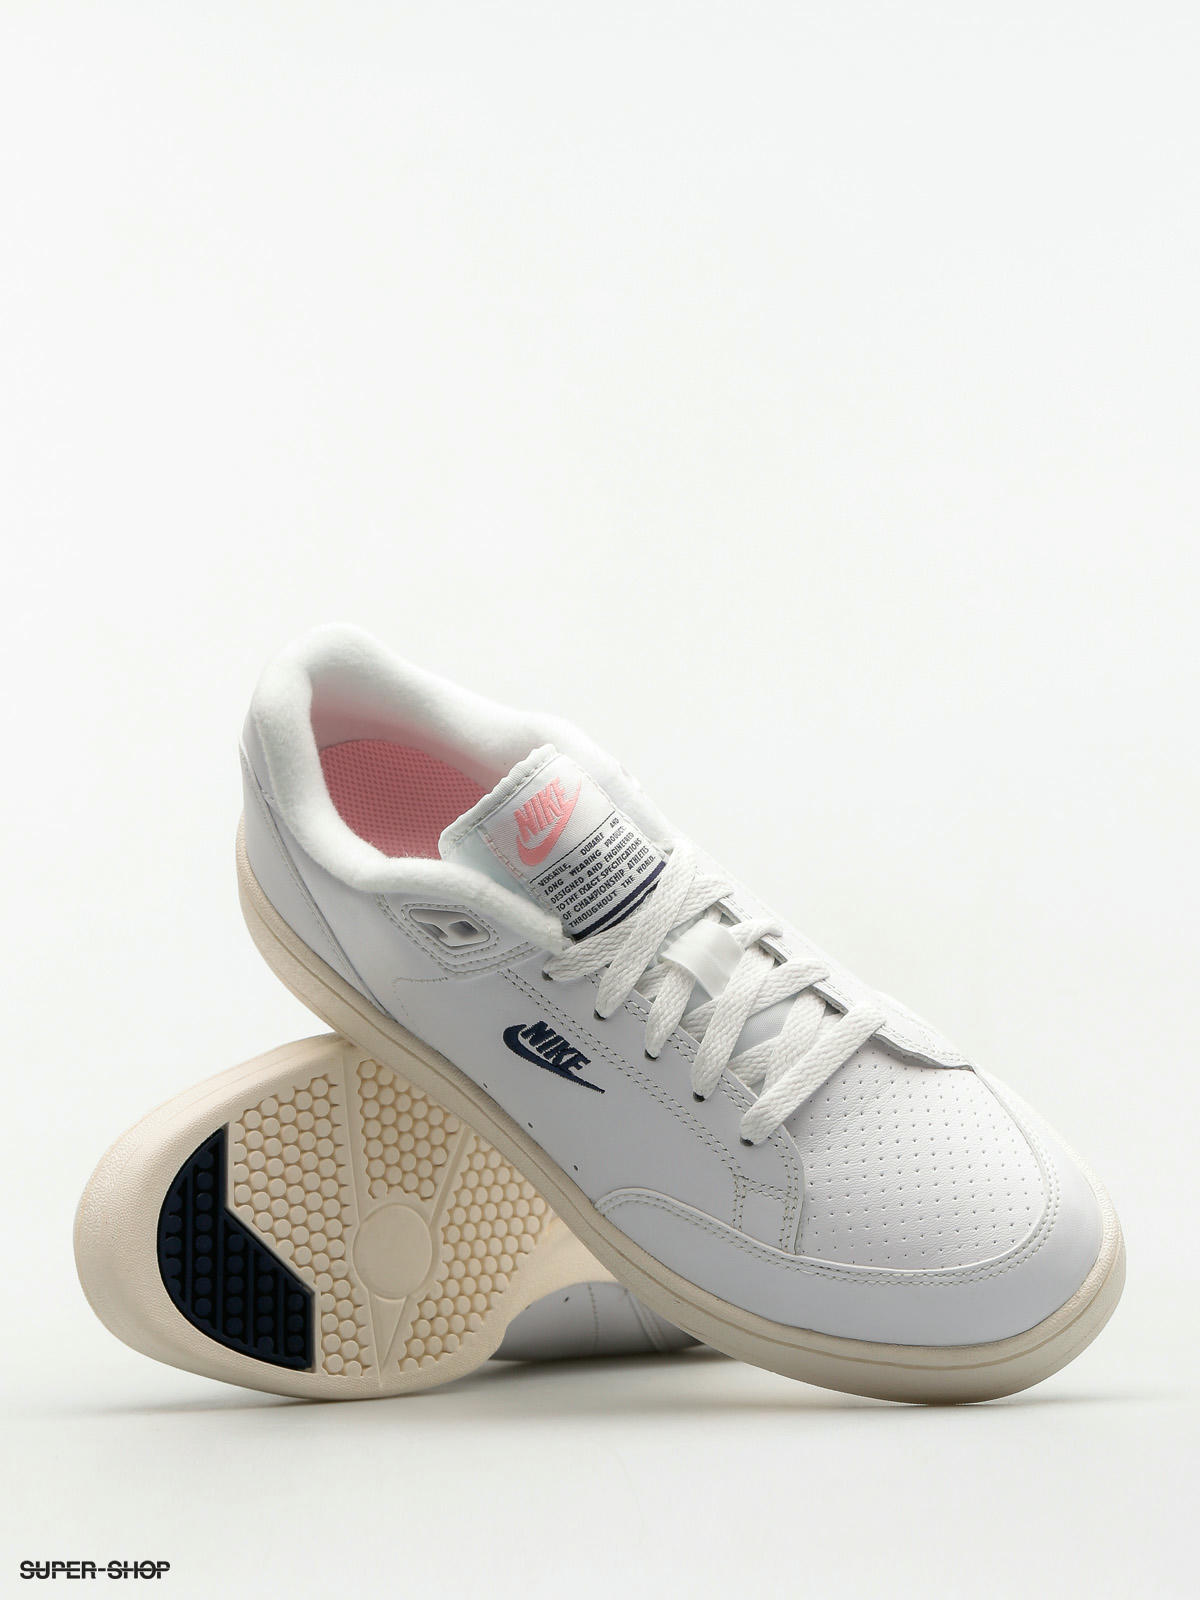 Nike Grandstand II Shoes sail arctic punch)